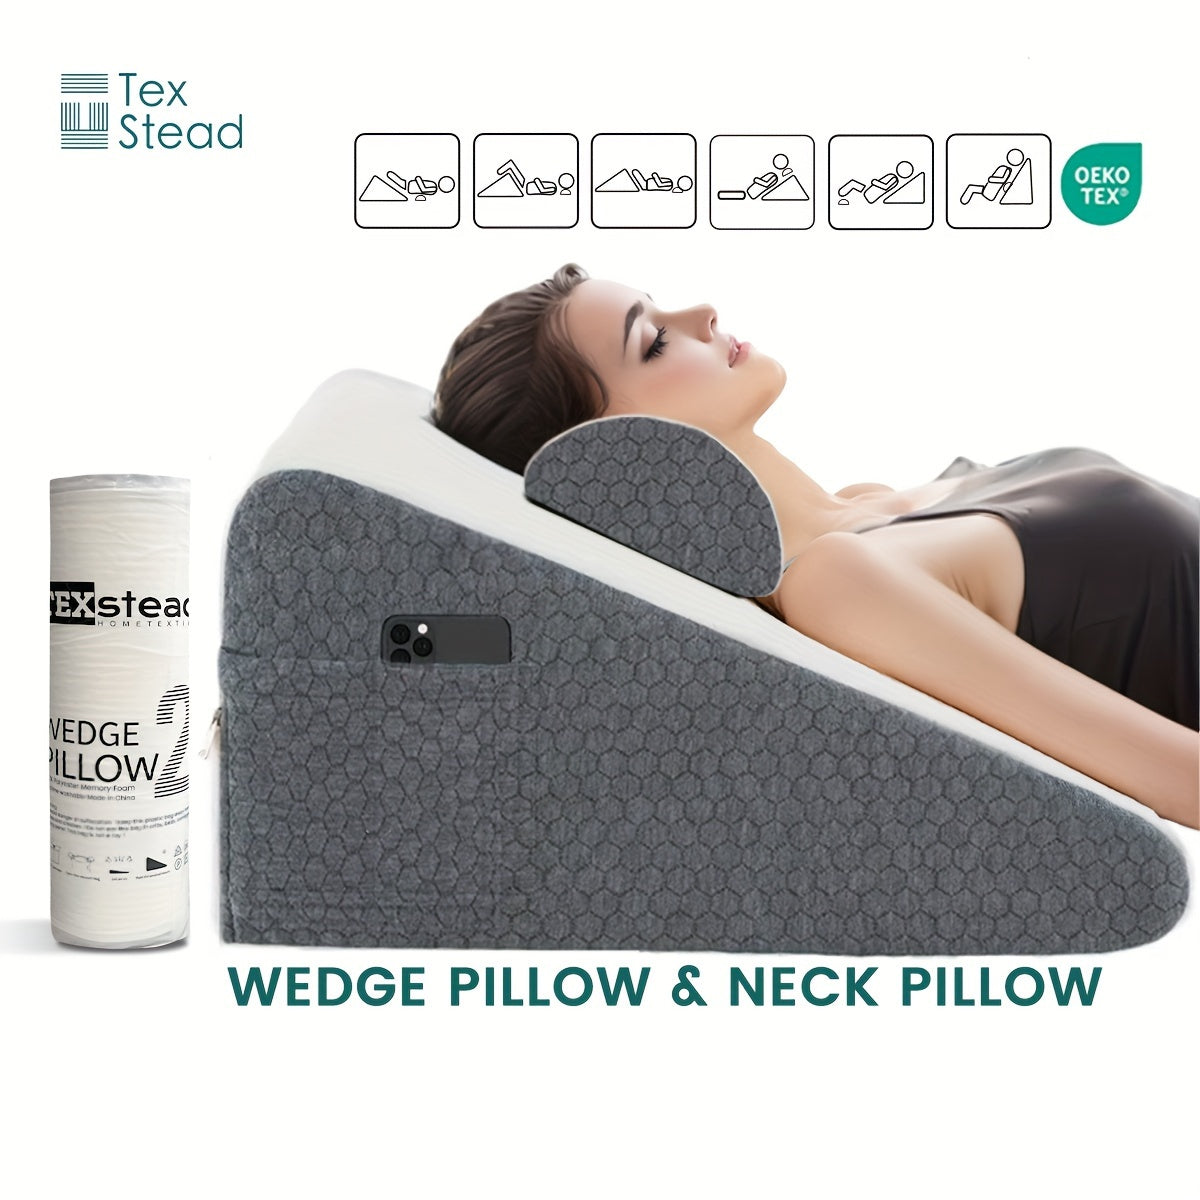 Memory Foam Bed Wedge Pillow/Neck Pillow For Back, Leg, And Knee